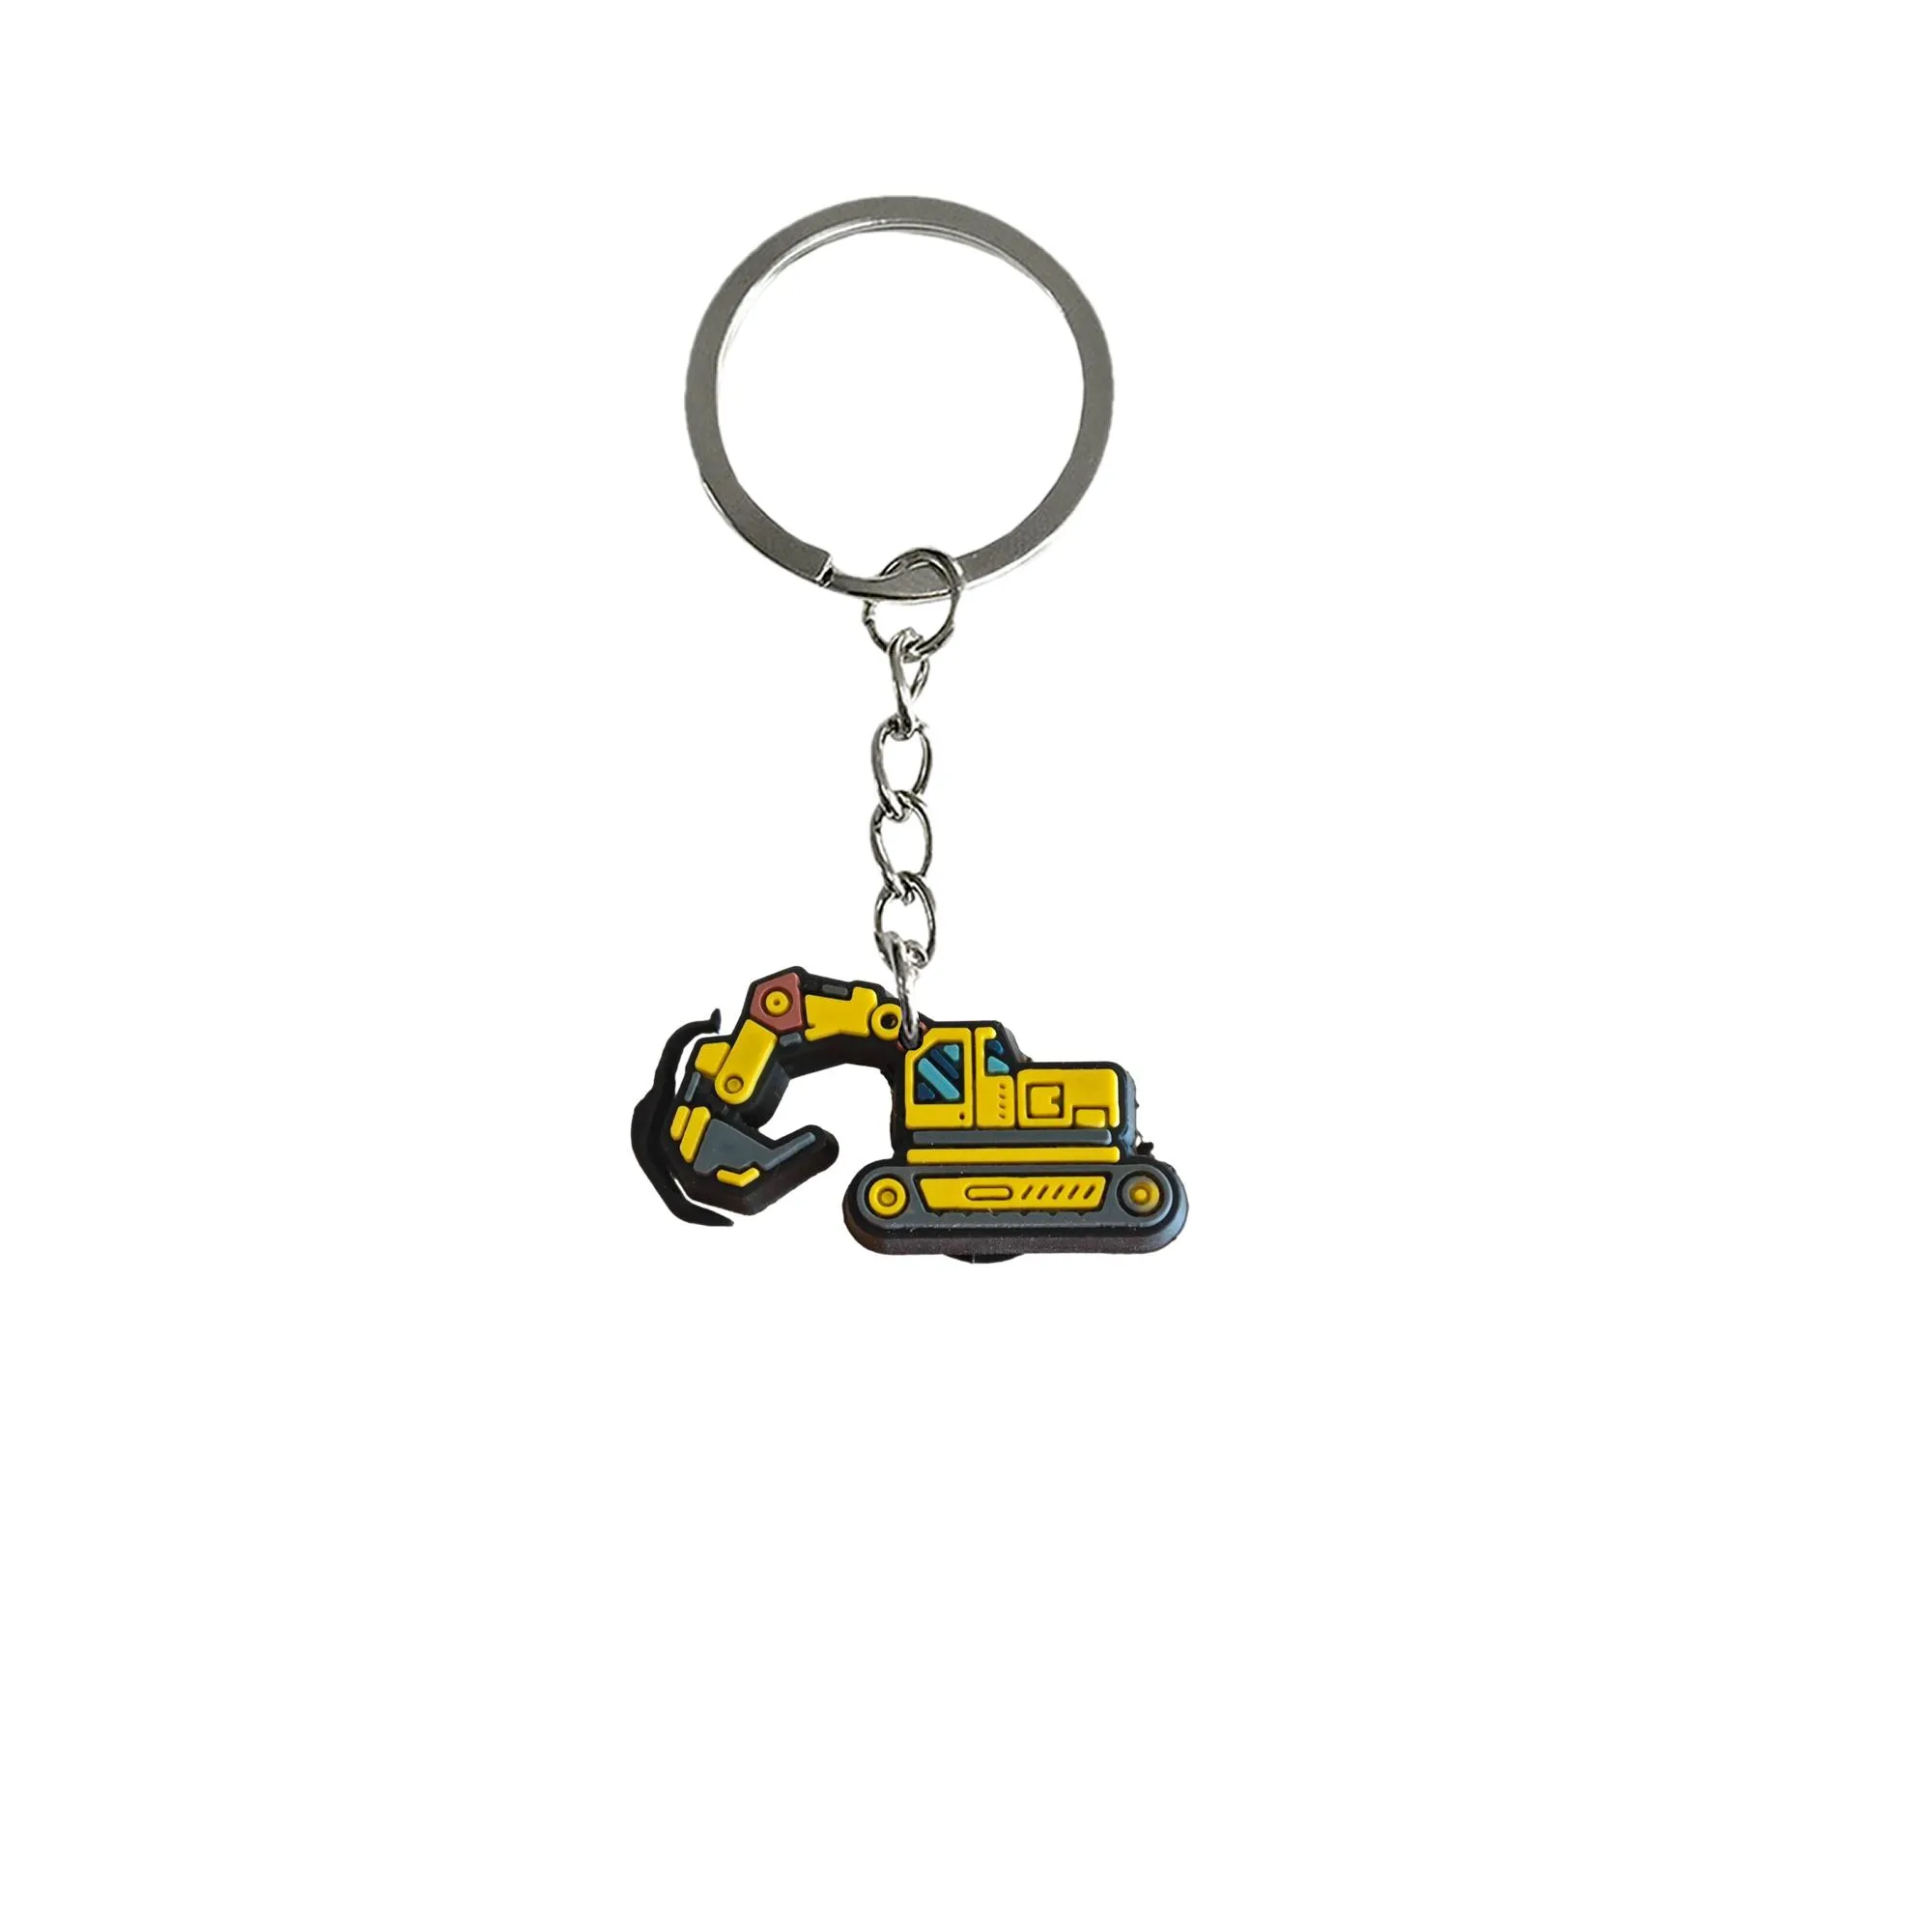 excavator 12 keychain key chain accessories for backpack handbag and car gift valentines day ring boys party favors keyring suitable schoolbag keychains shoulder bag pendant charm women